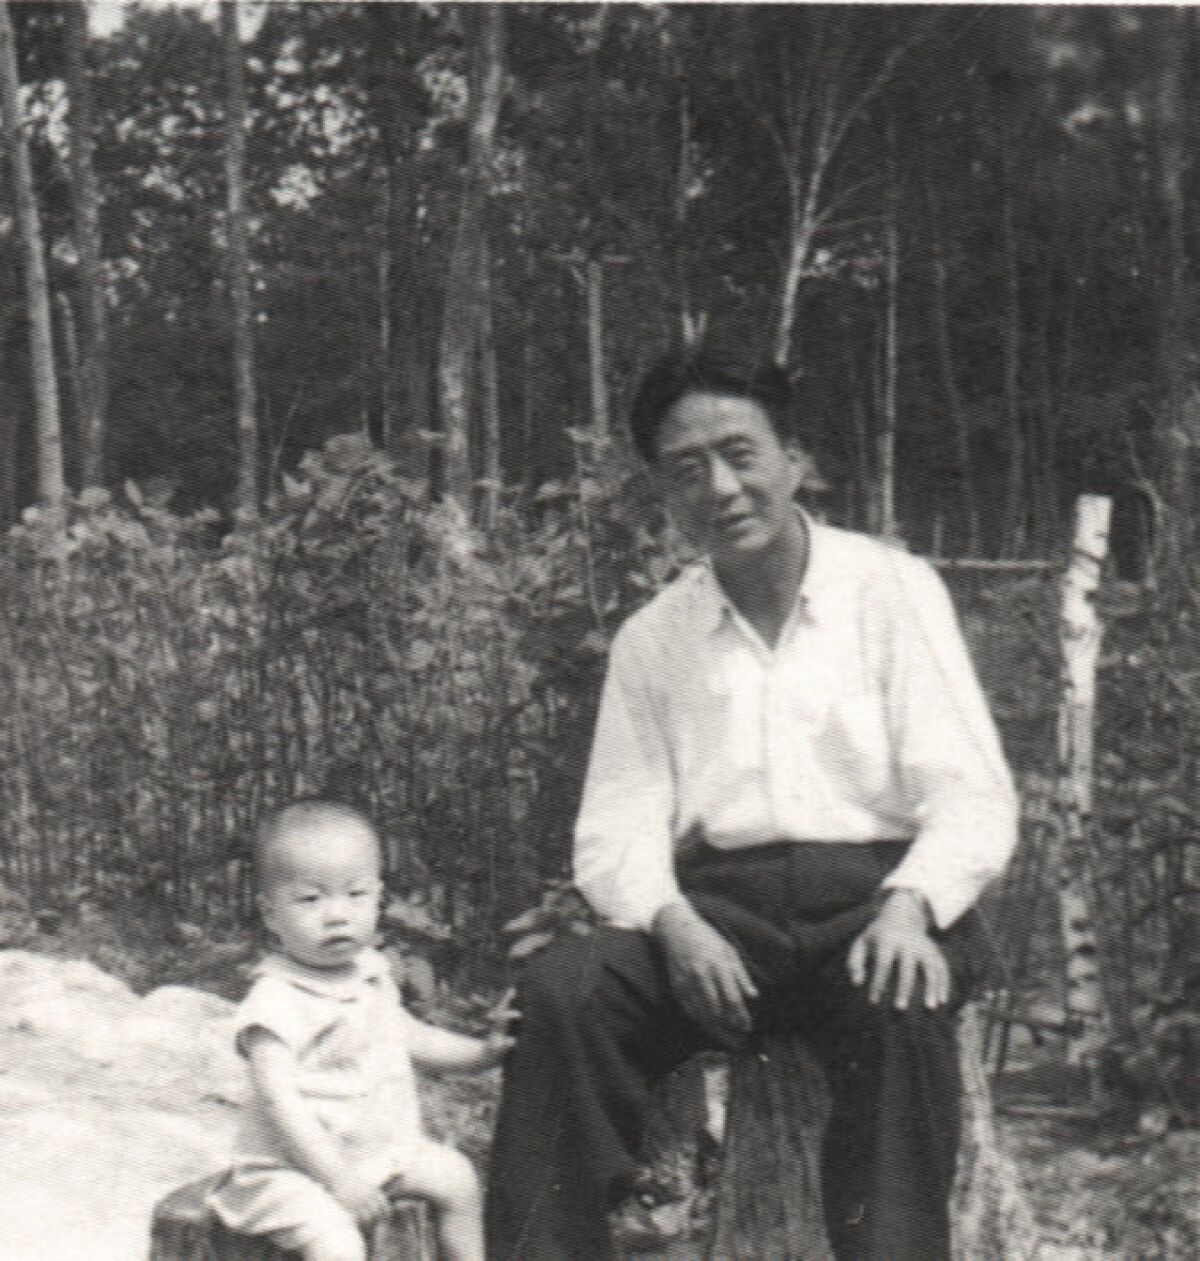 Photo of Ai Weiwei as a toddler with his father, Ai Qing.